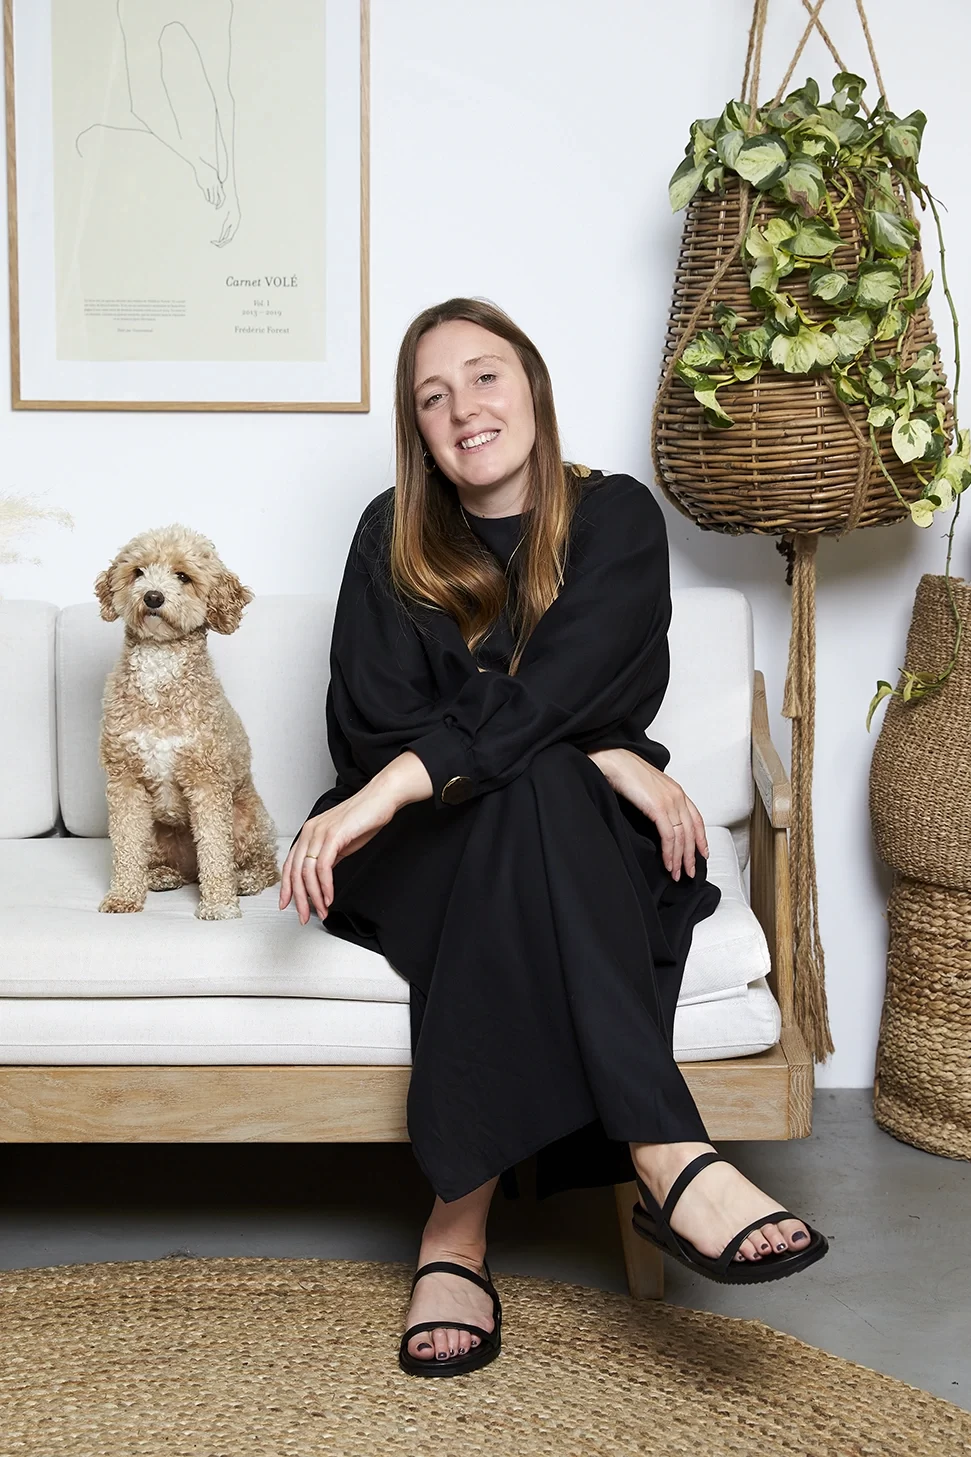 Fashion designer Amy Powney’s guide to sustainable style